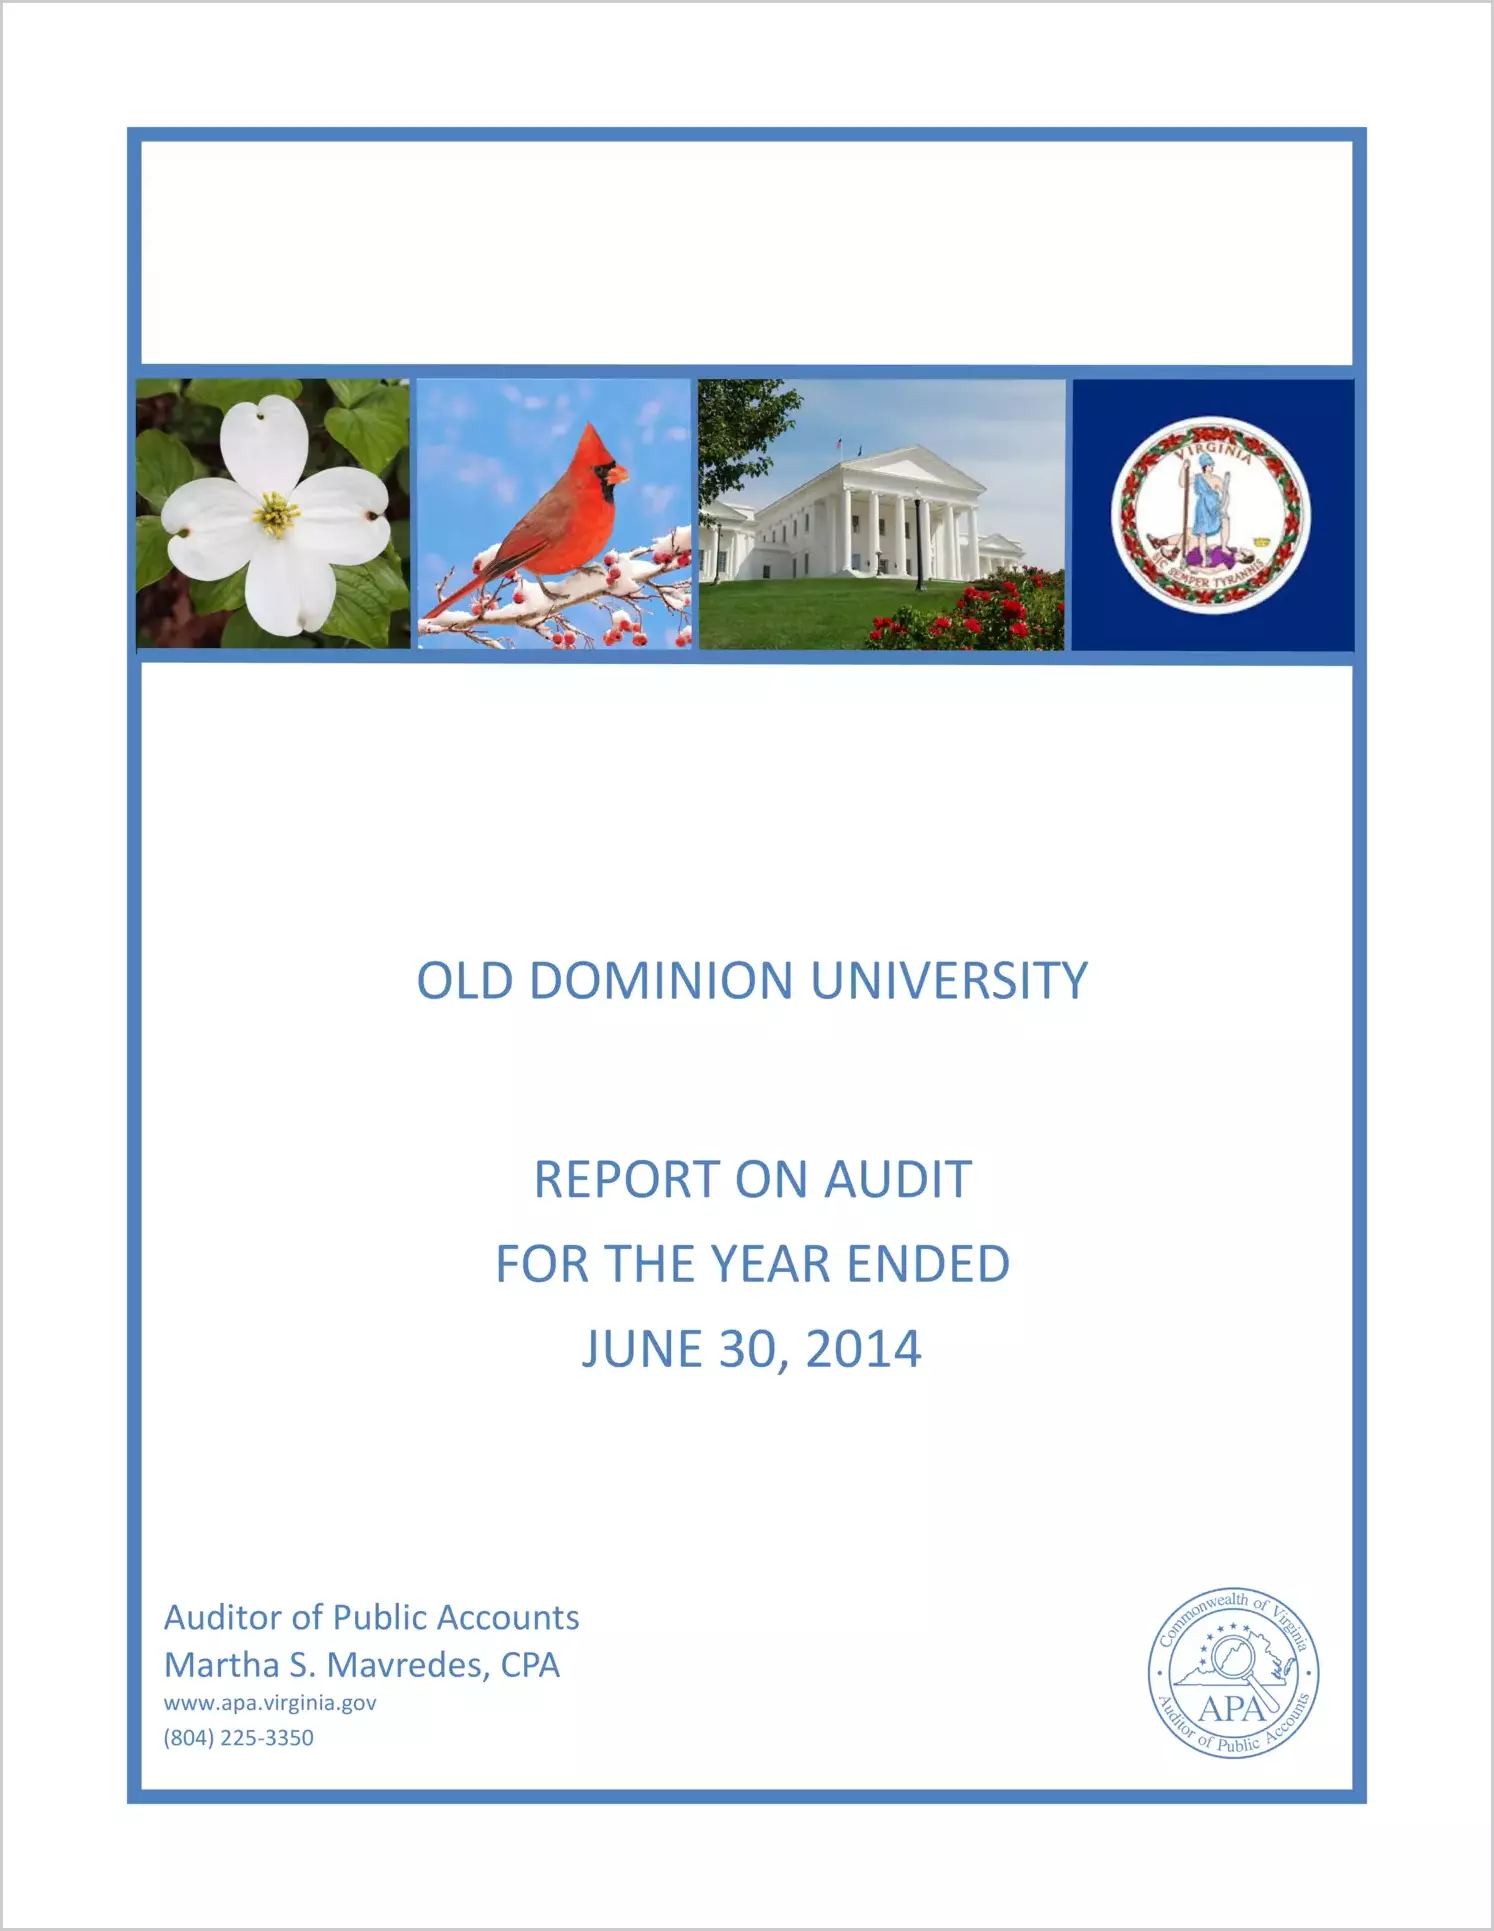 Old Dominion University for the year ended June 30, 2014